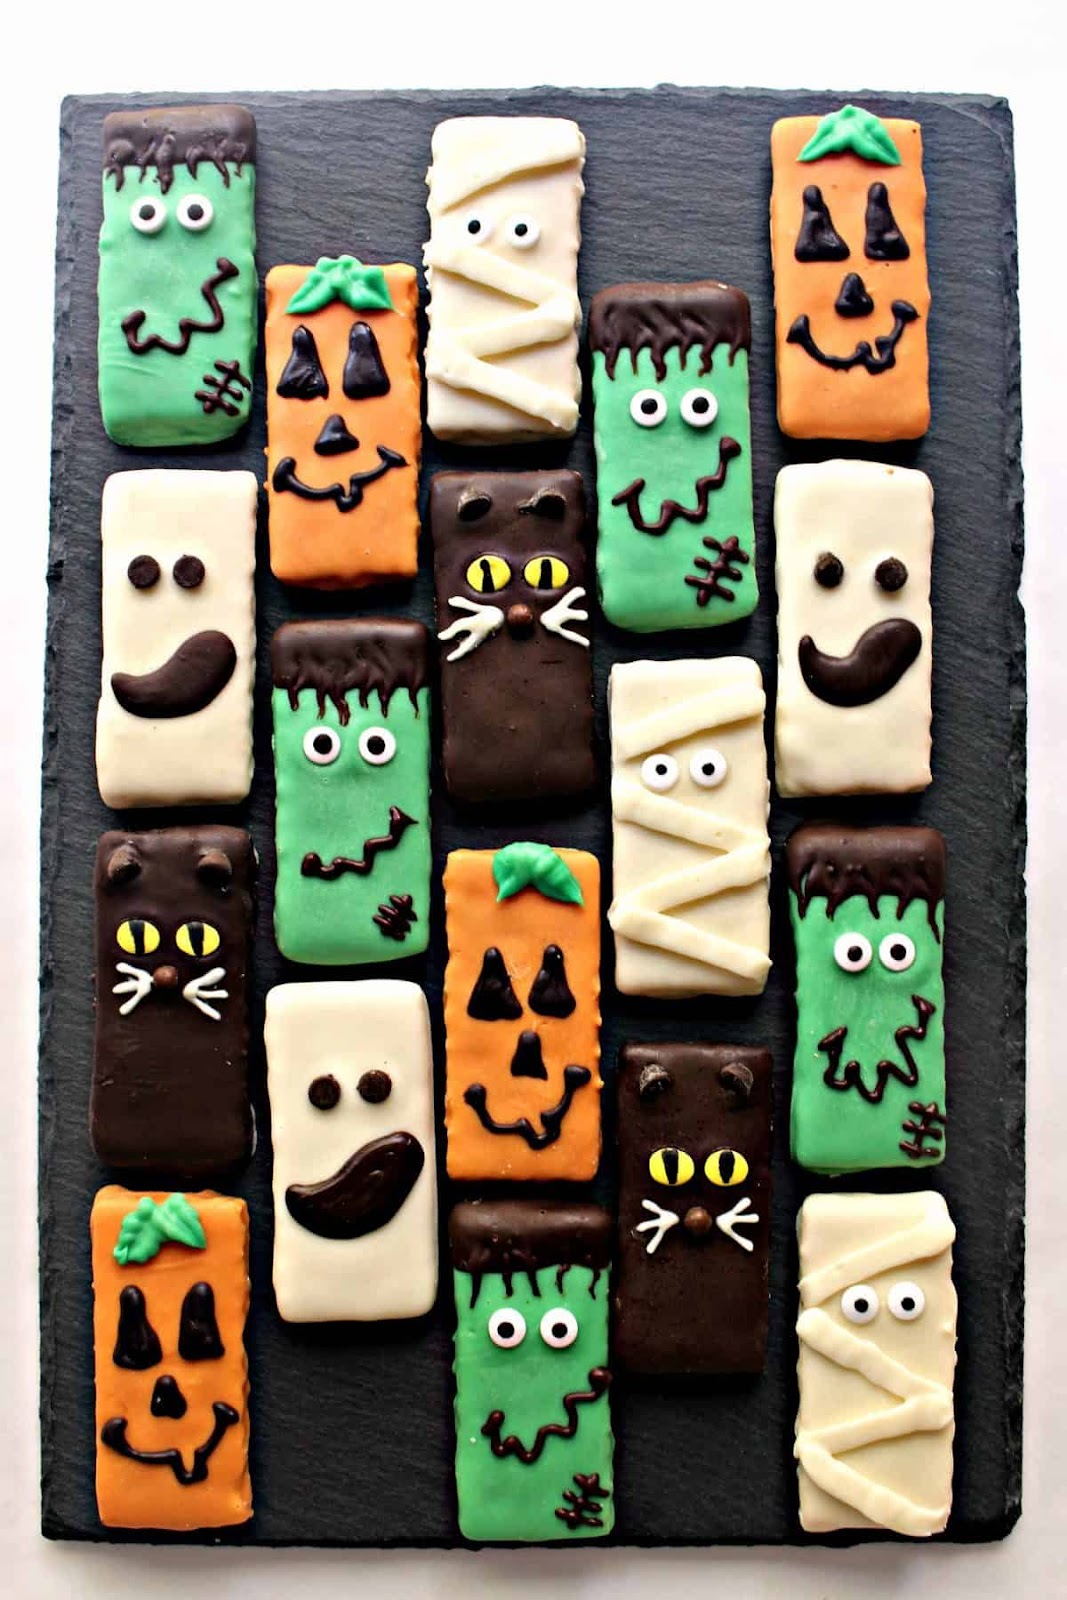 Graham crackers decorated with Halloween themed icing and monster faces on a black background.